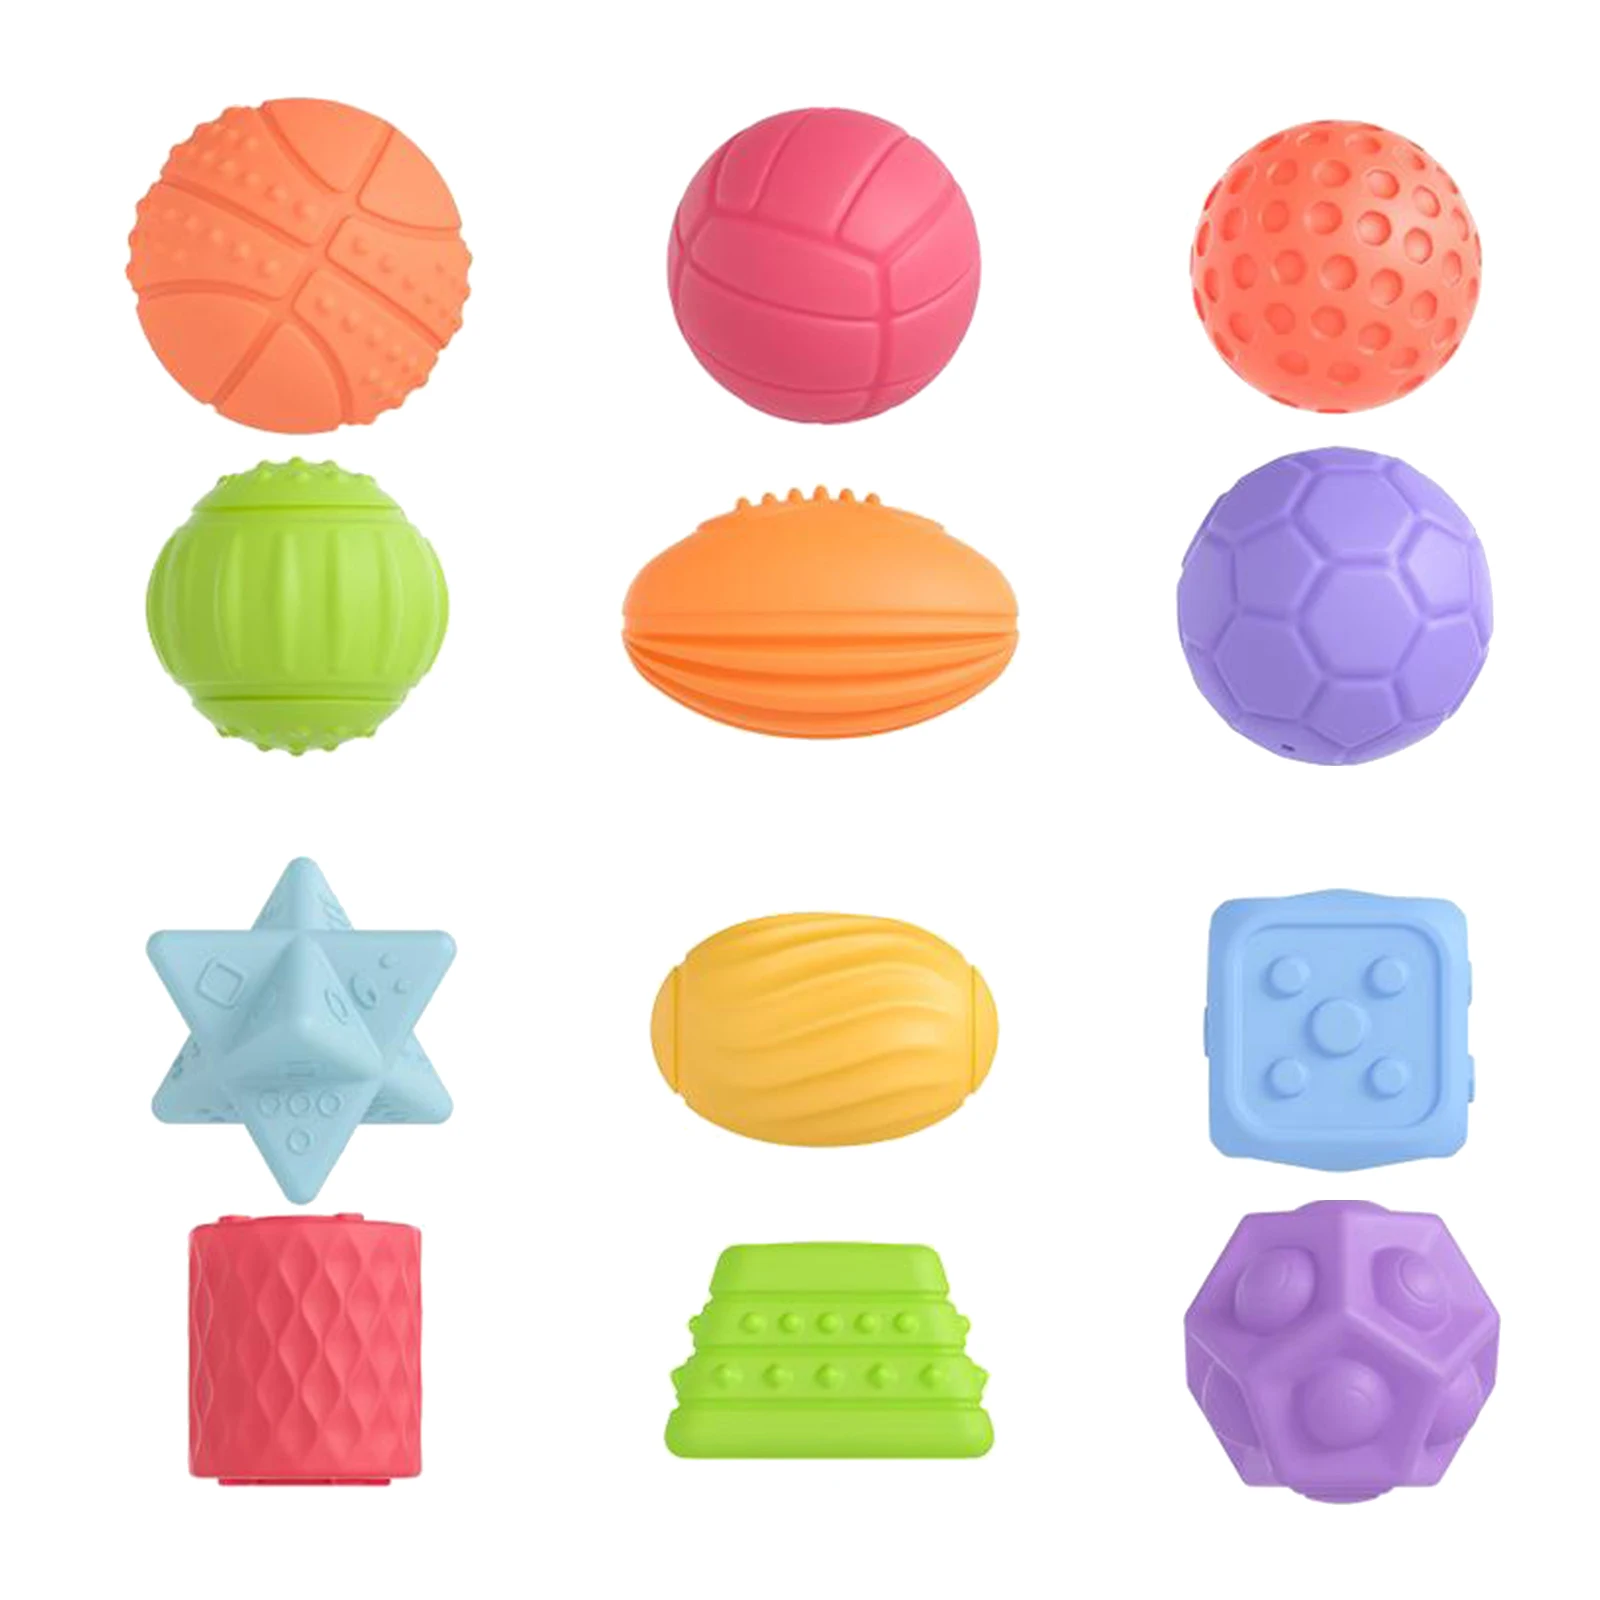 

Durable Sensory Balls Soft & Textured Balls for Babies & Toddlers